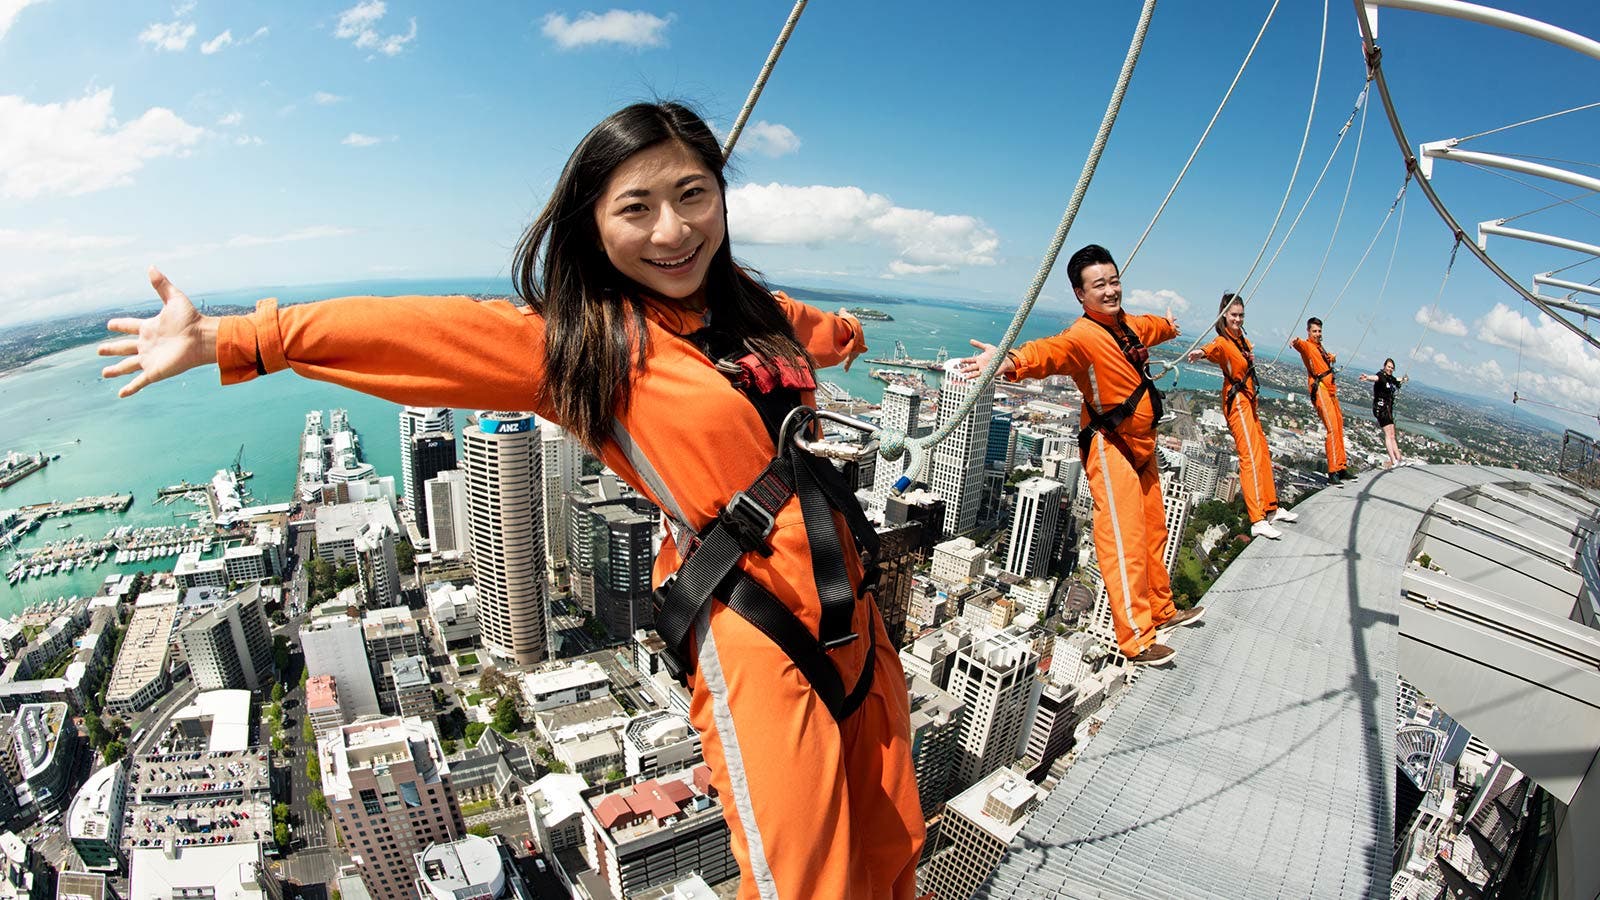 SkyJump or SkyWalk at the Sky Tower in Auckland.